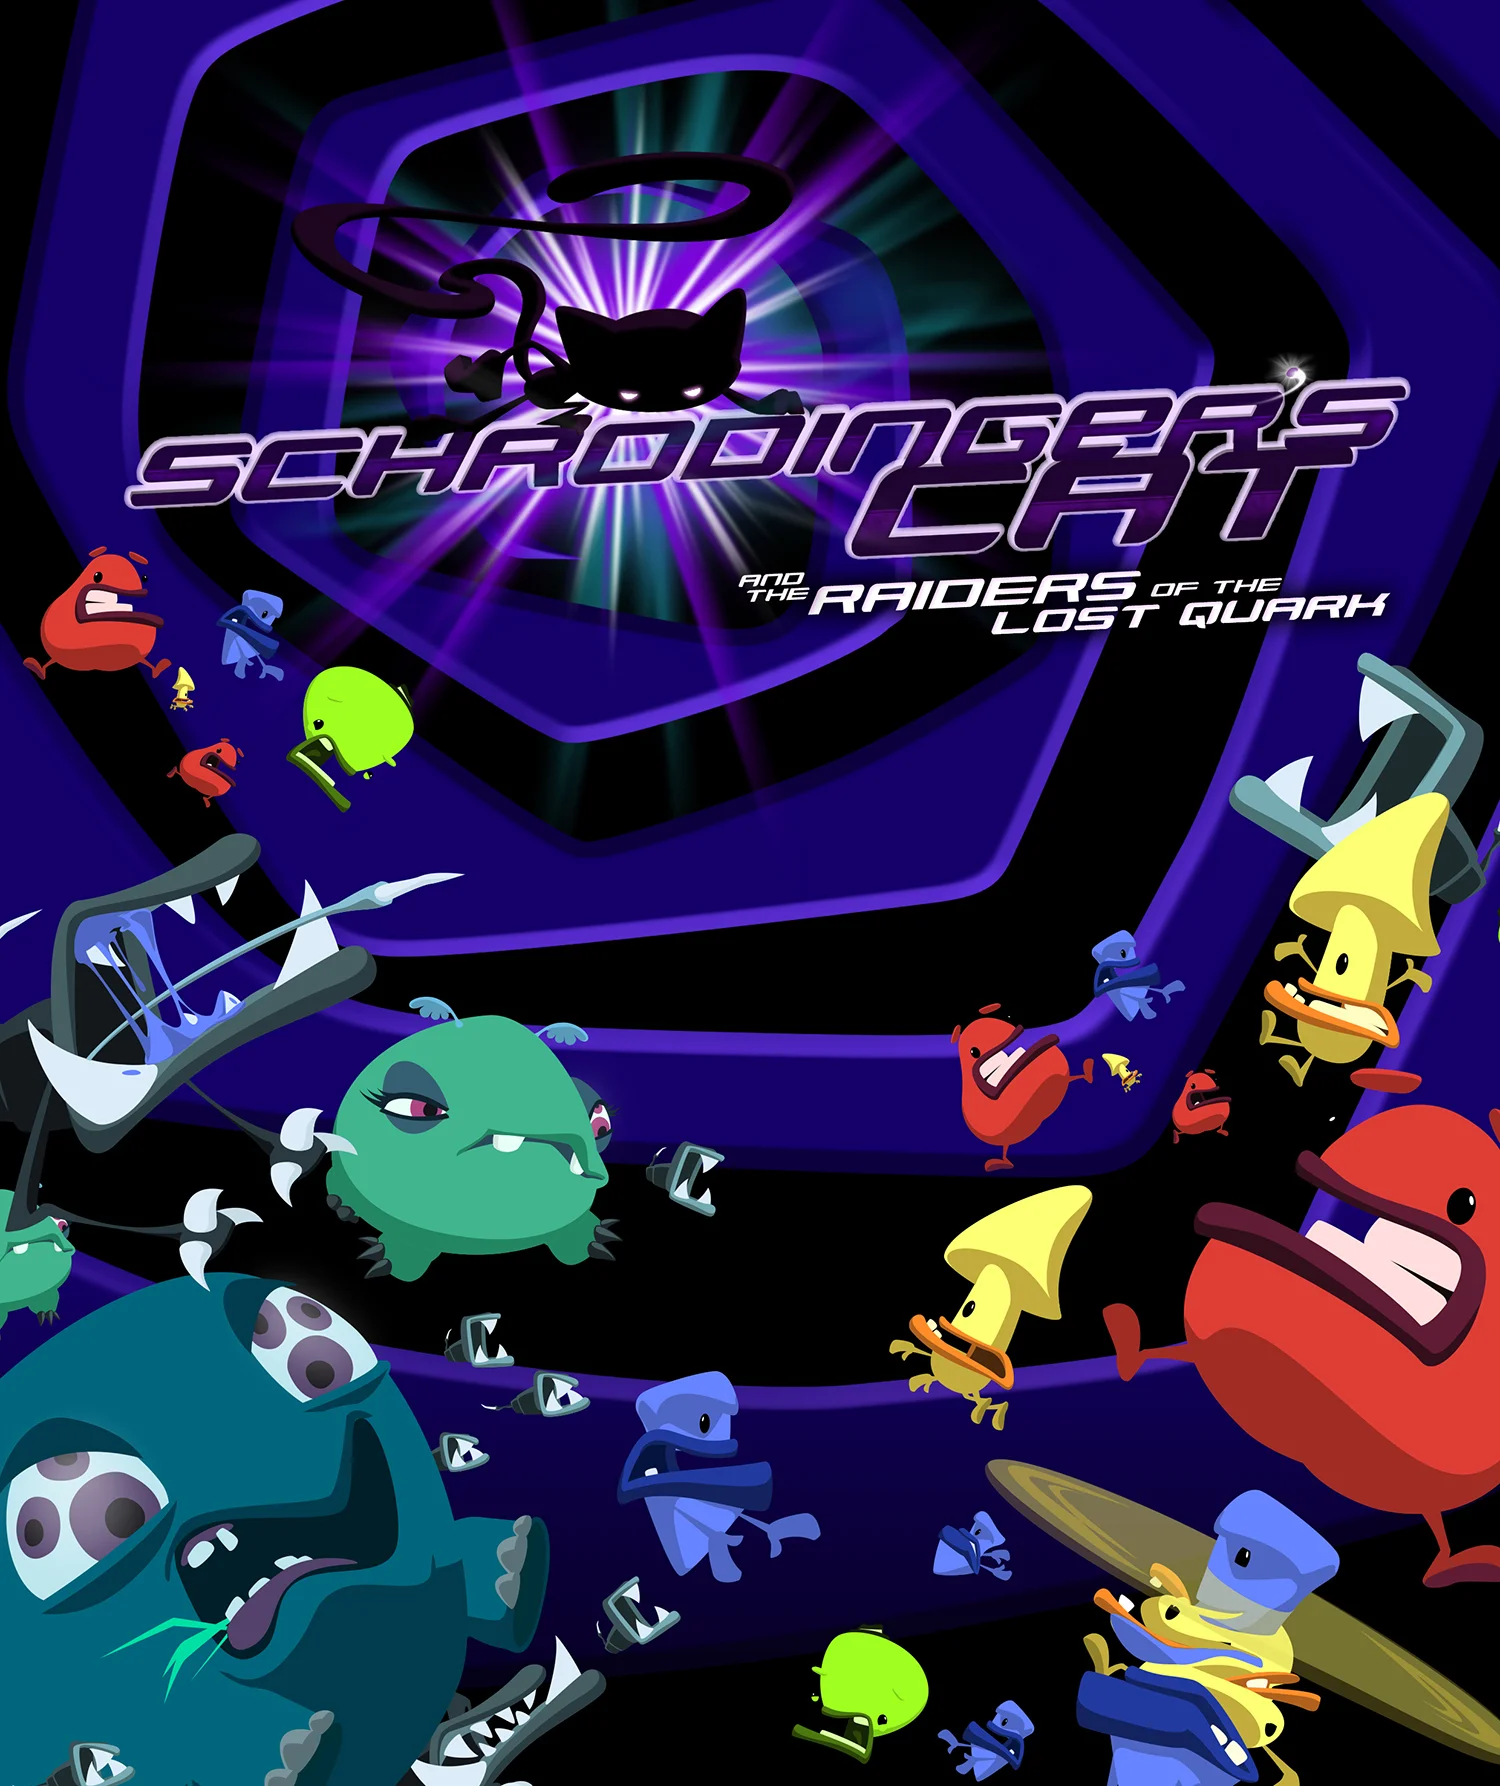 Schrodinger’s Cat and the Raiders of the Lost Quark